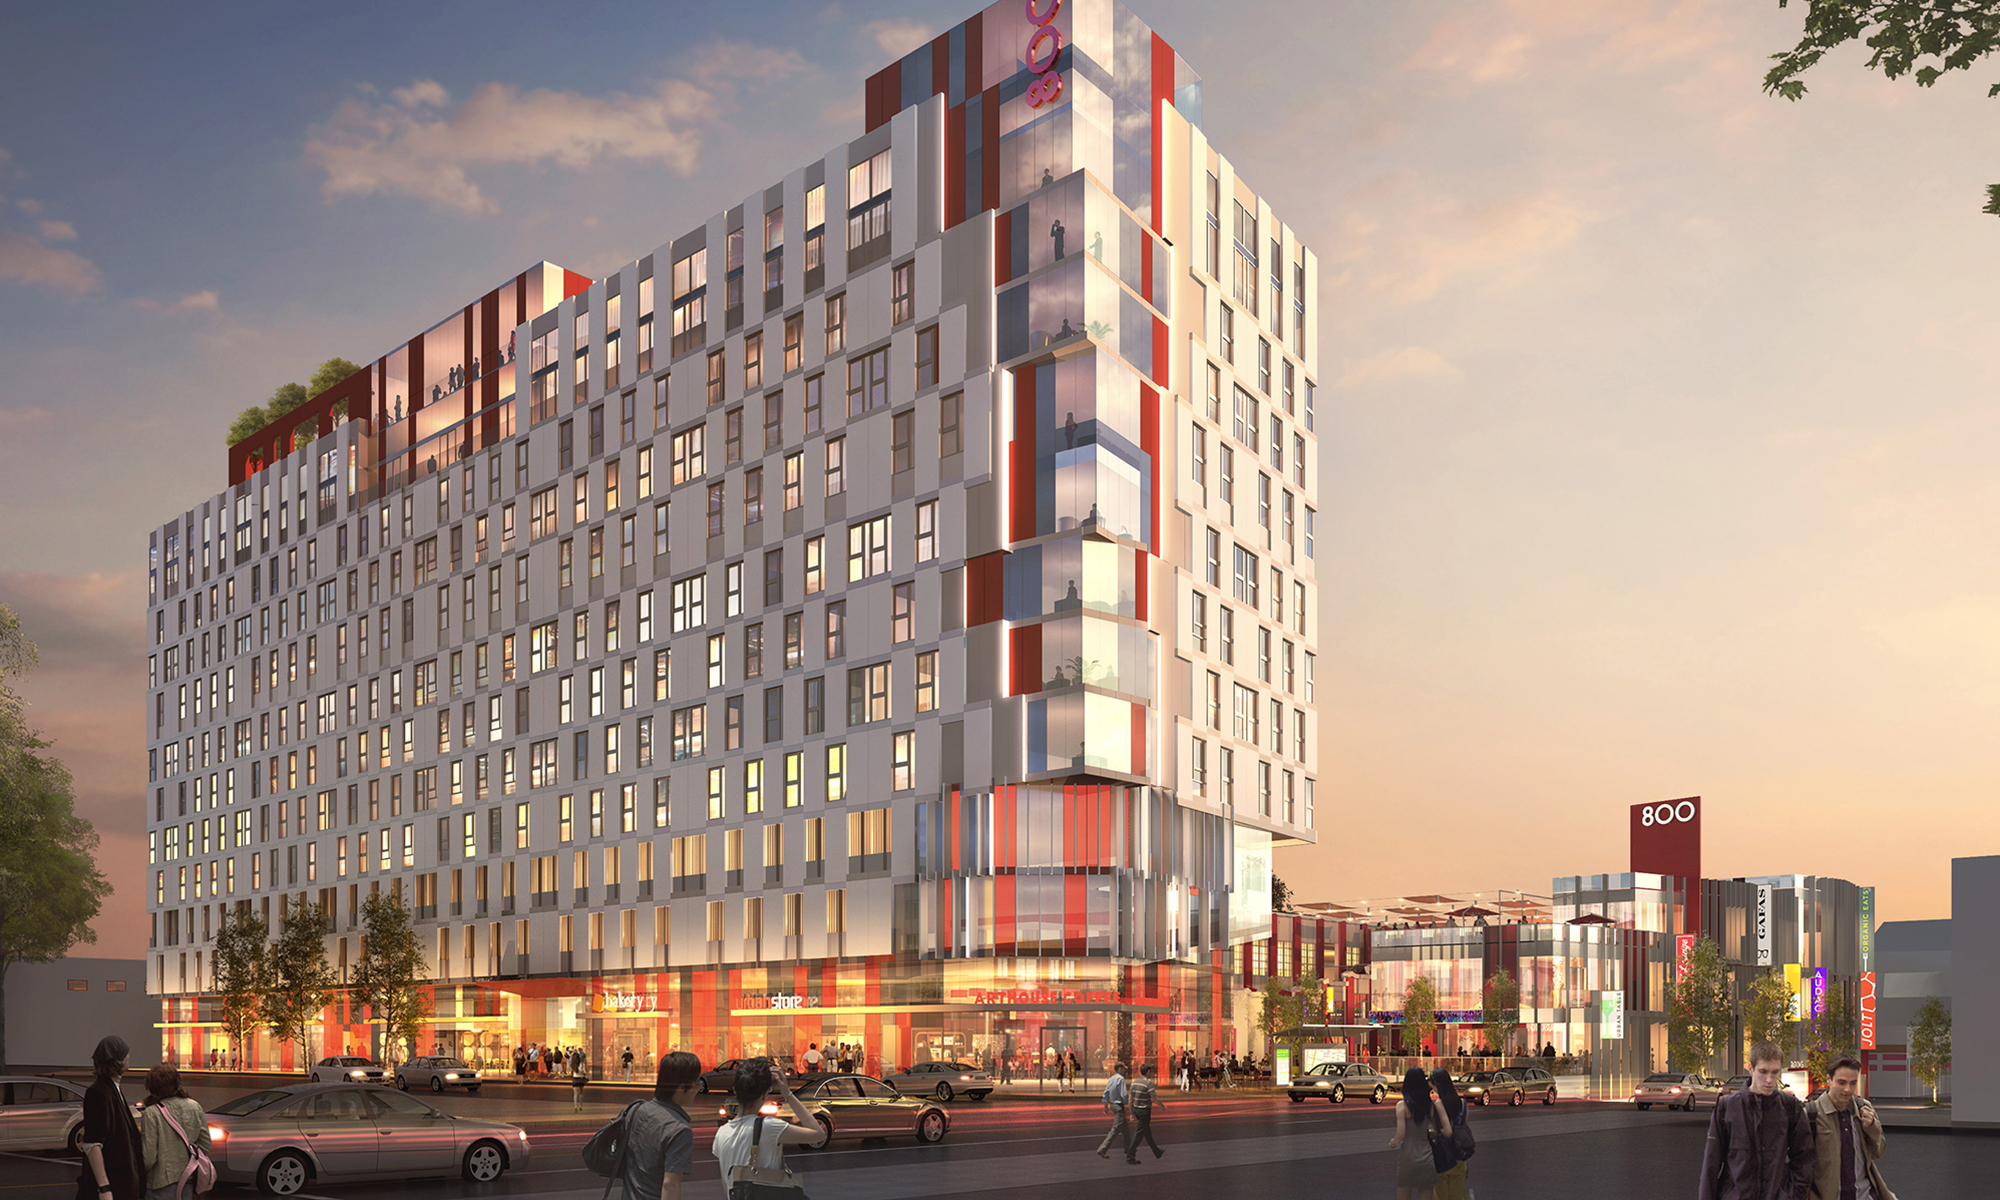 Rendering from street view of front mixed-use project with accents of red.